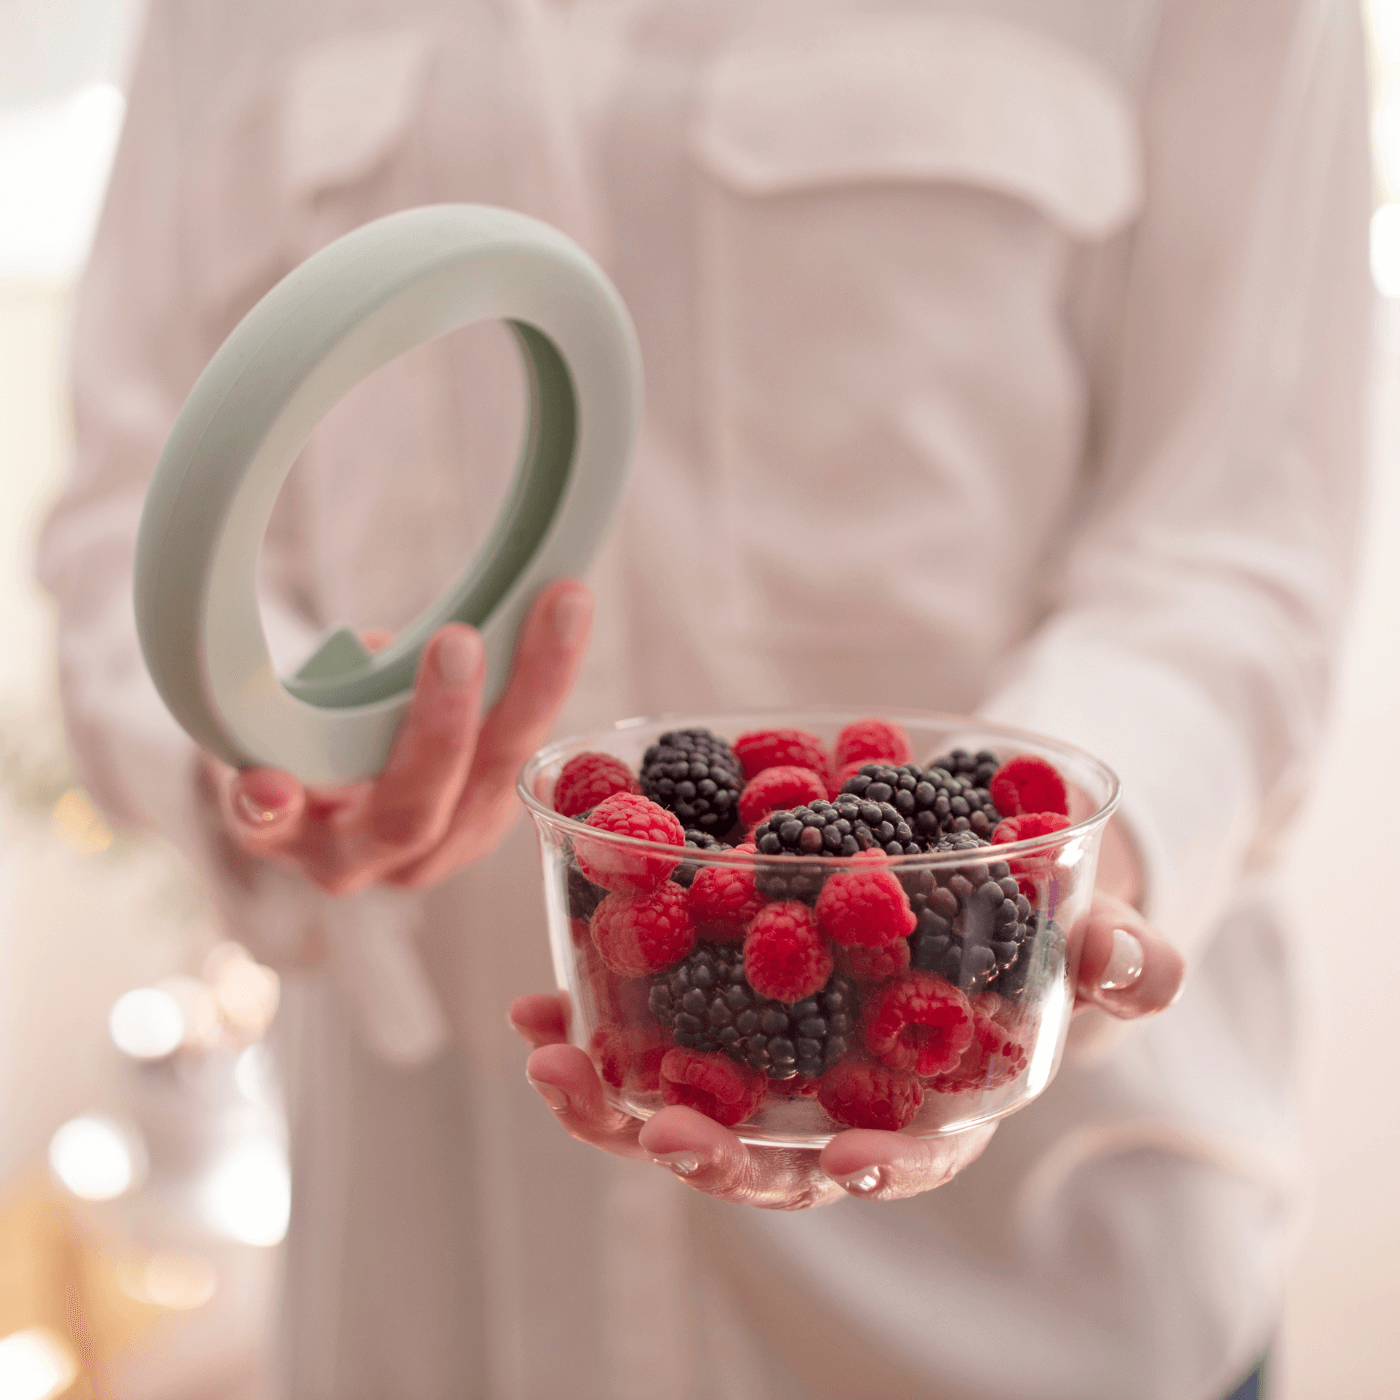 Woman holding in one hand a glass bowl filled with raspberries and in the other hand the adjustable food huggers lid